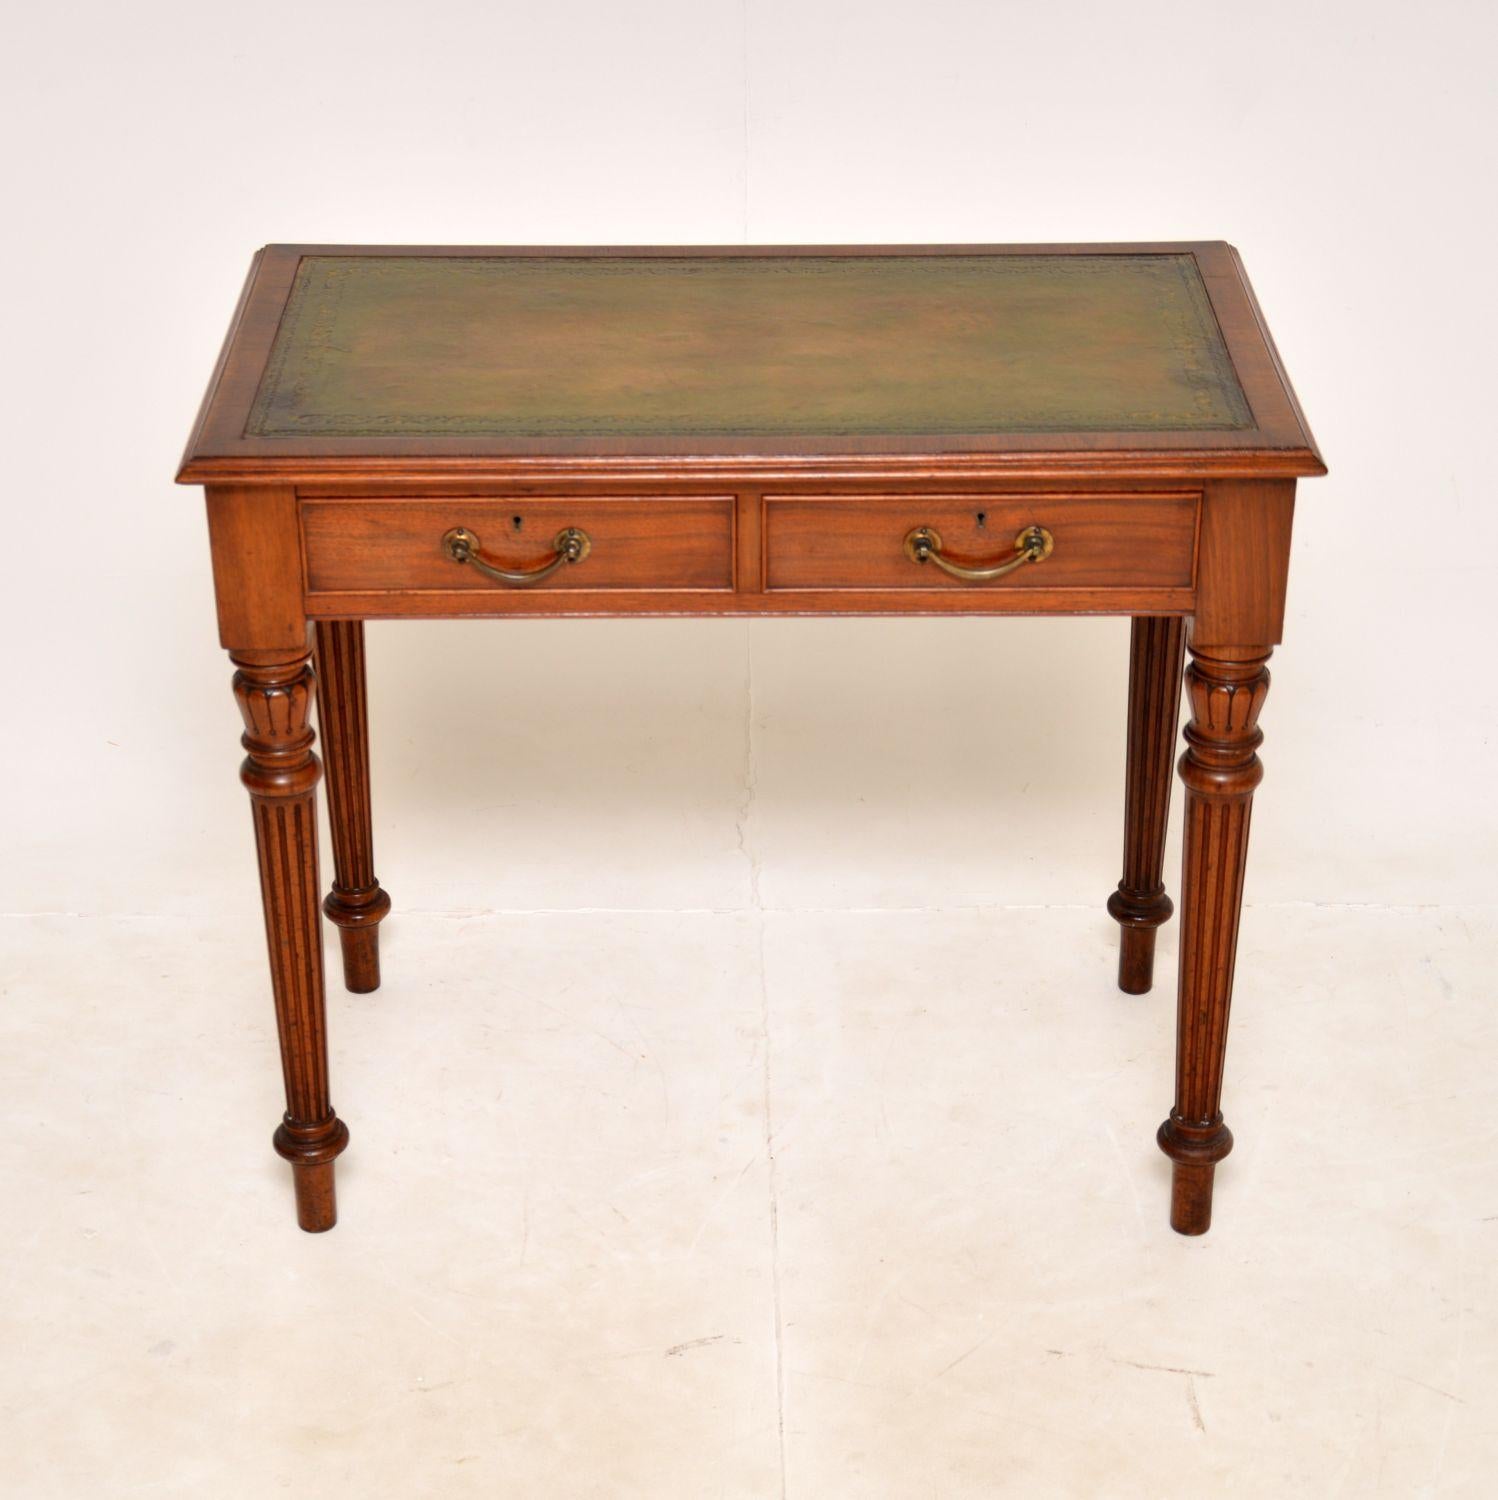 A superb antique Victorian writing desk in solid walnut. This was made in England, it dates from around the 1860-1880 period.

It is of amazing quality and is a very useful size. The legs are beautifully turned with wonderful carved details. The